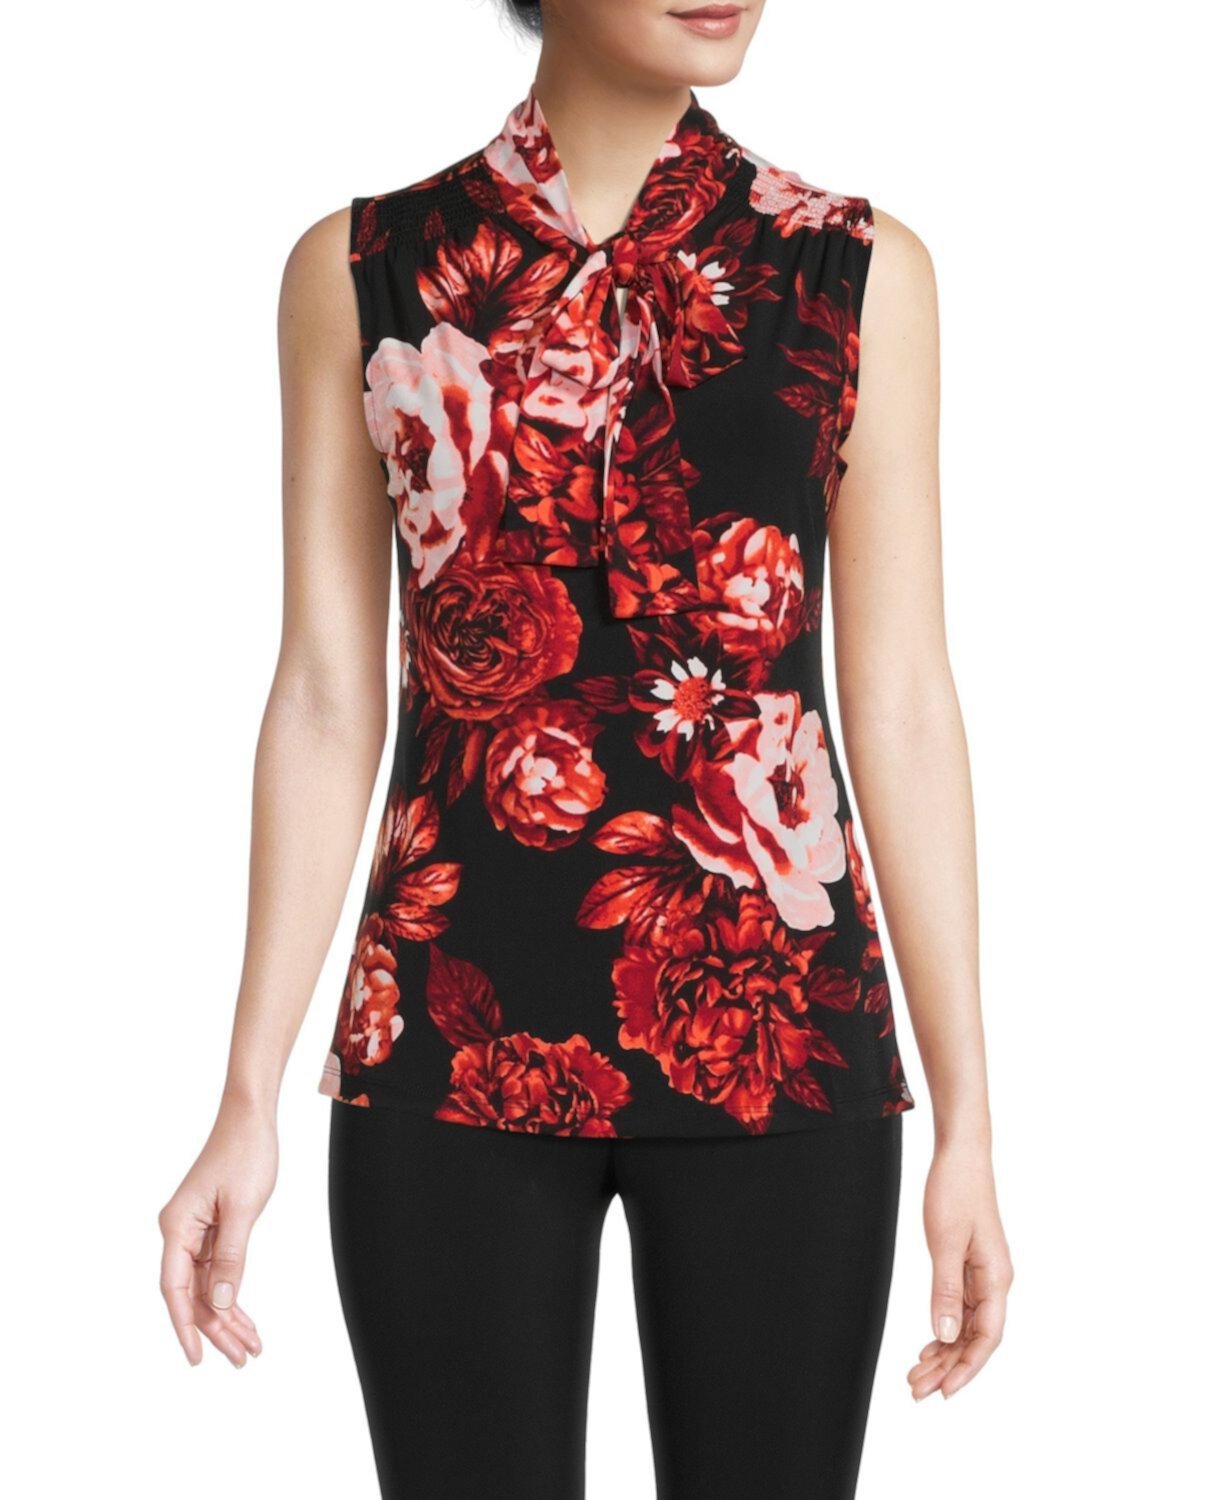 Sleeveless Floral Top Premise